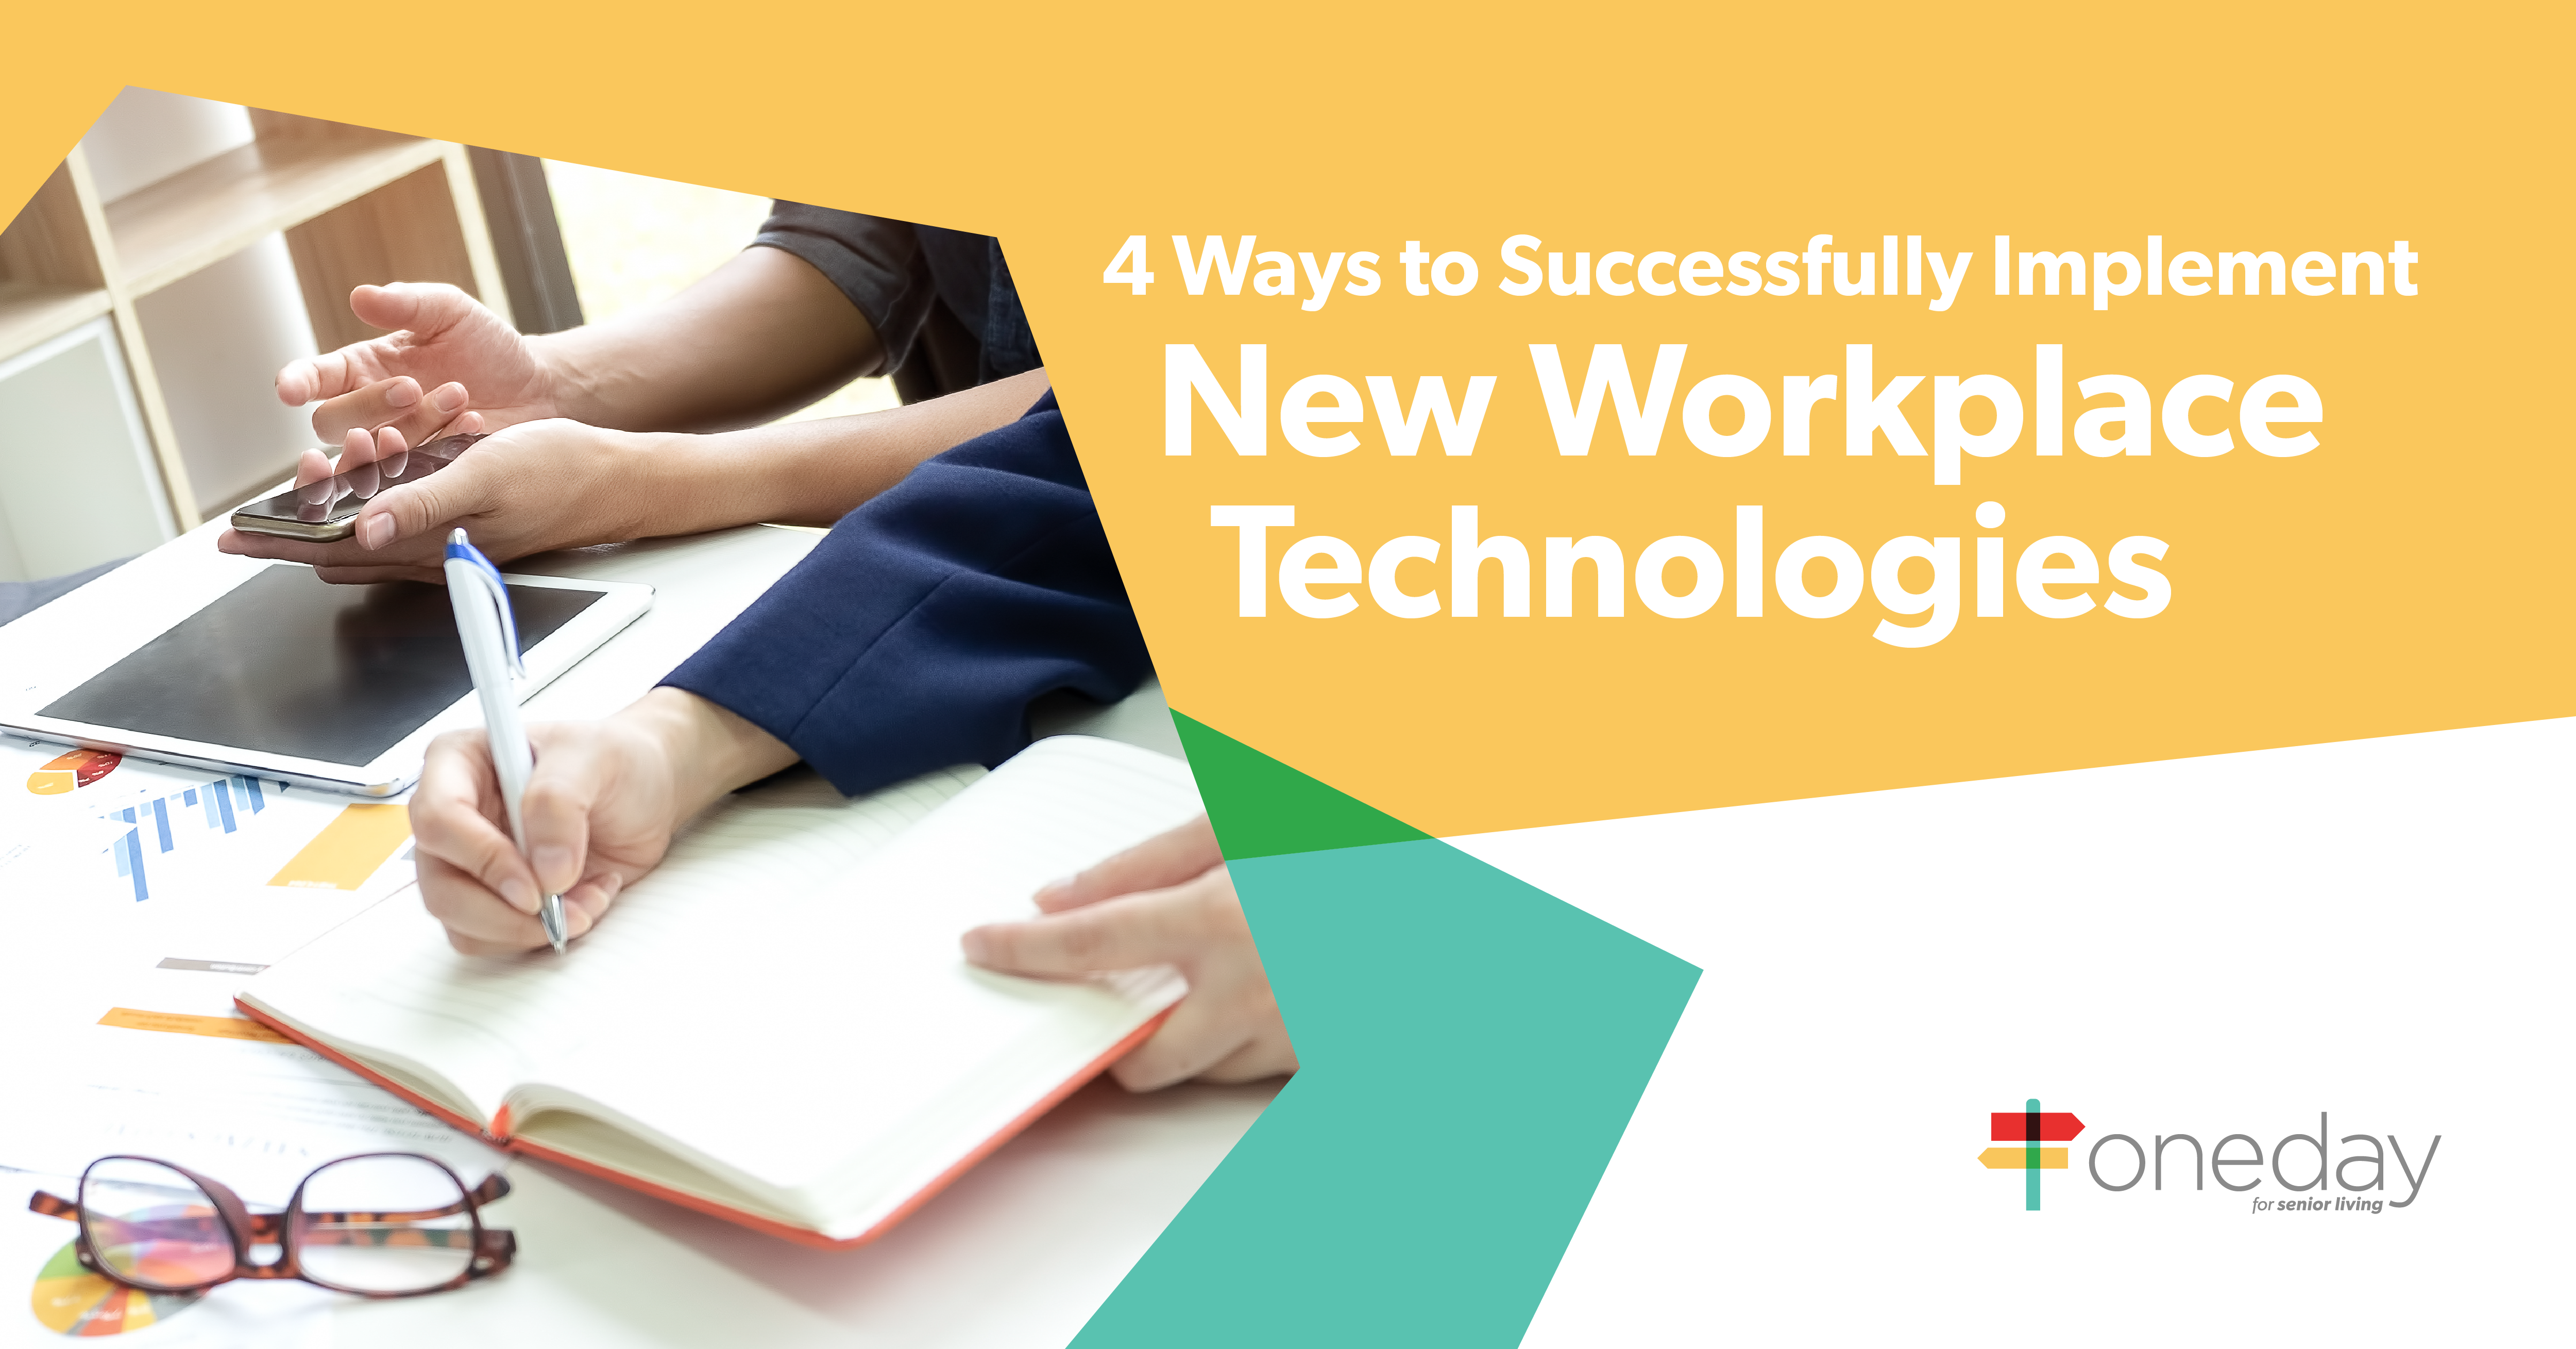 Insights and tips from OneDay’s team on easy ways you can ensure your new workplace technologies provide maximum benefit and value to your community.